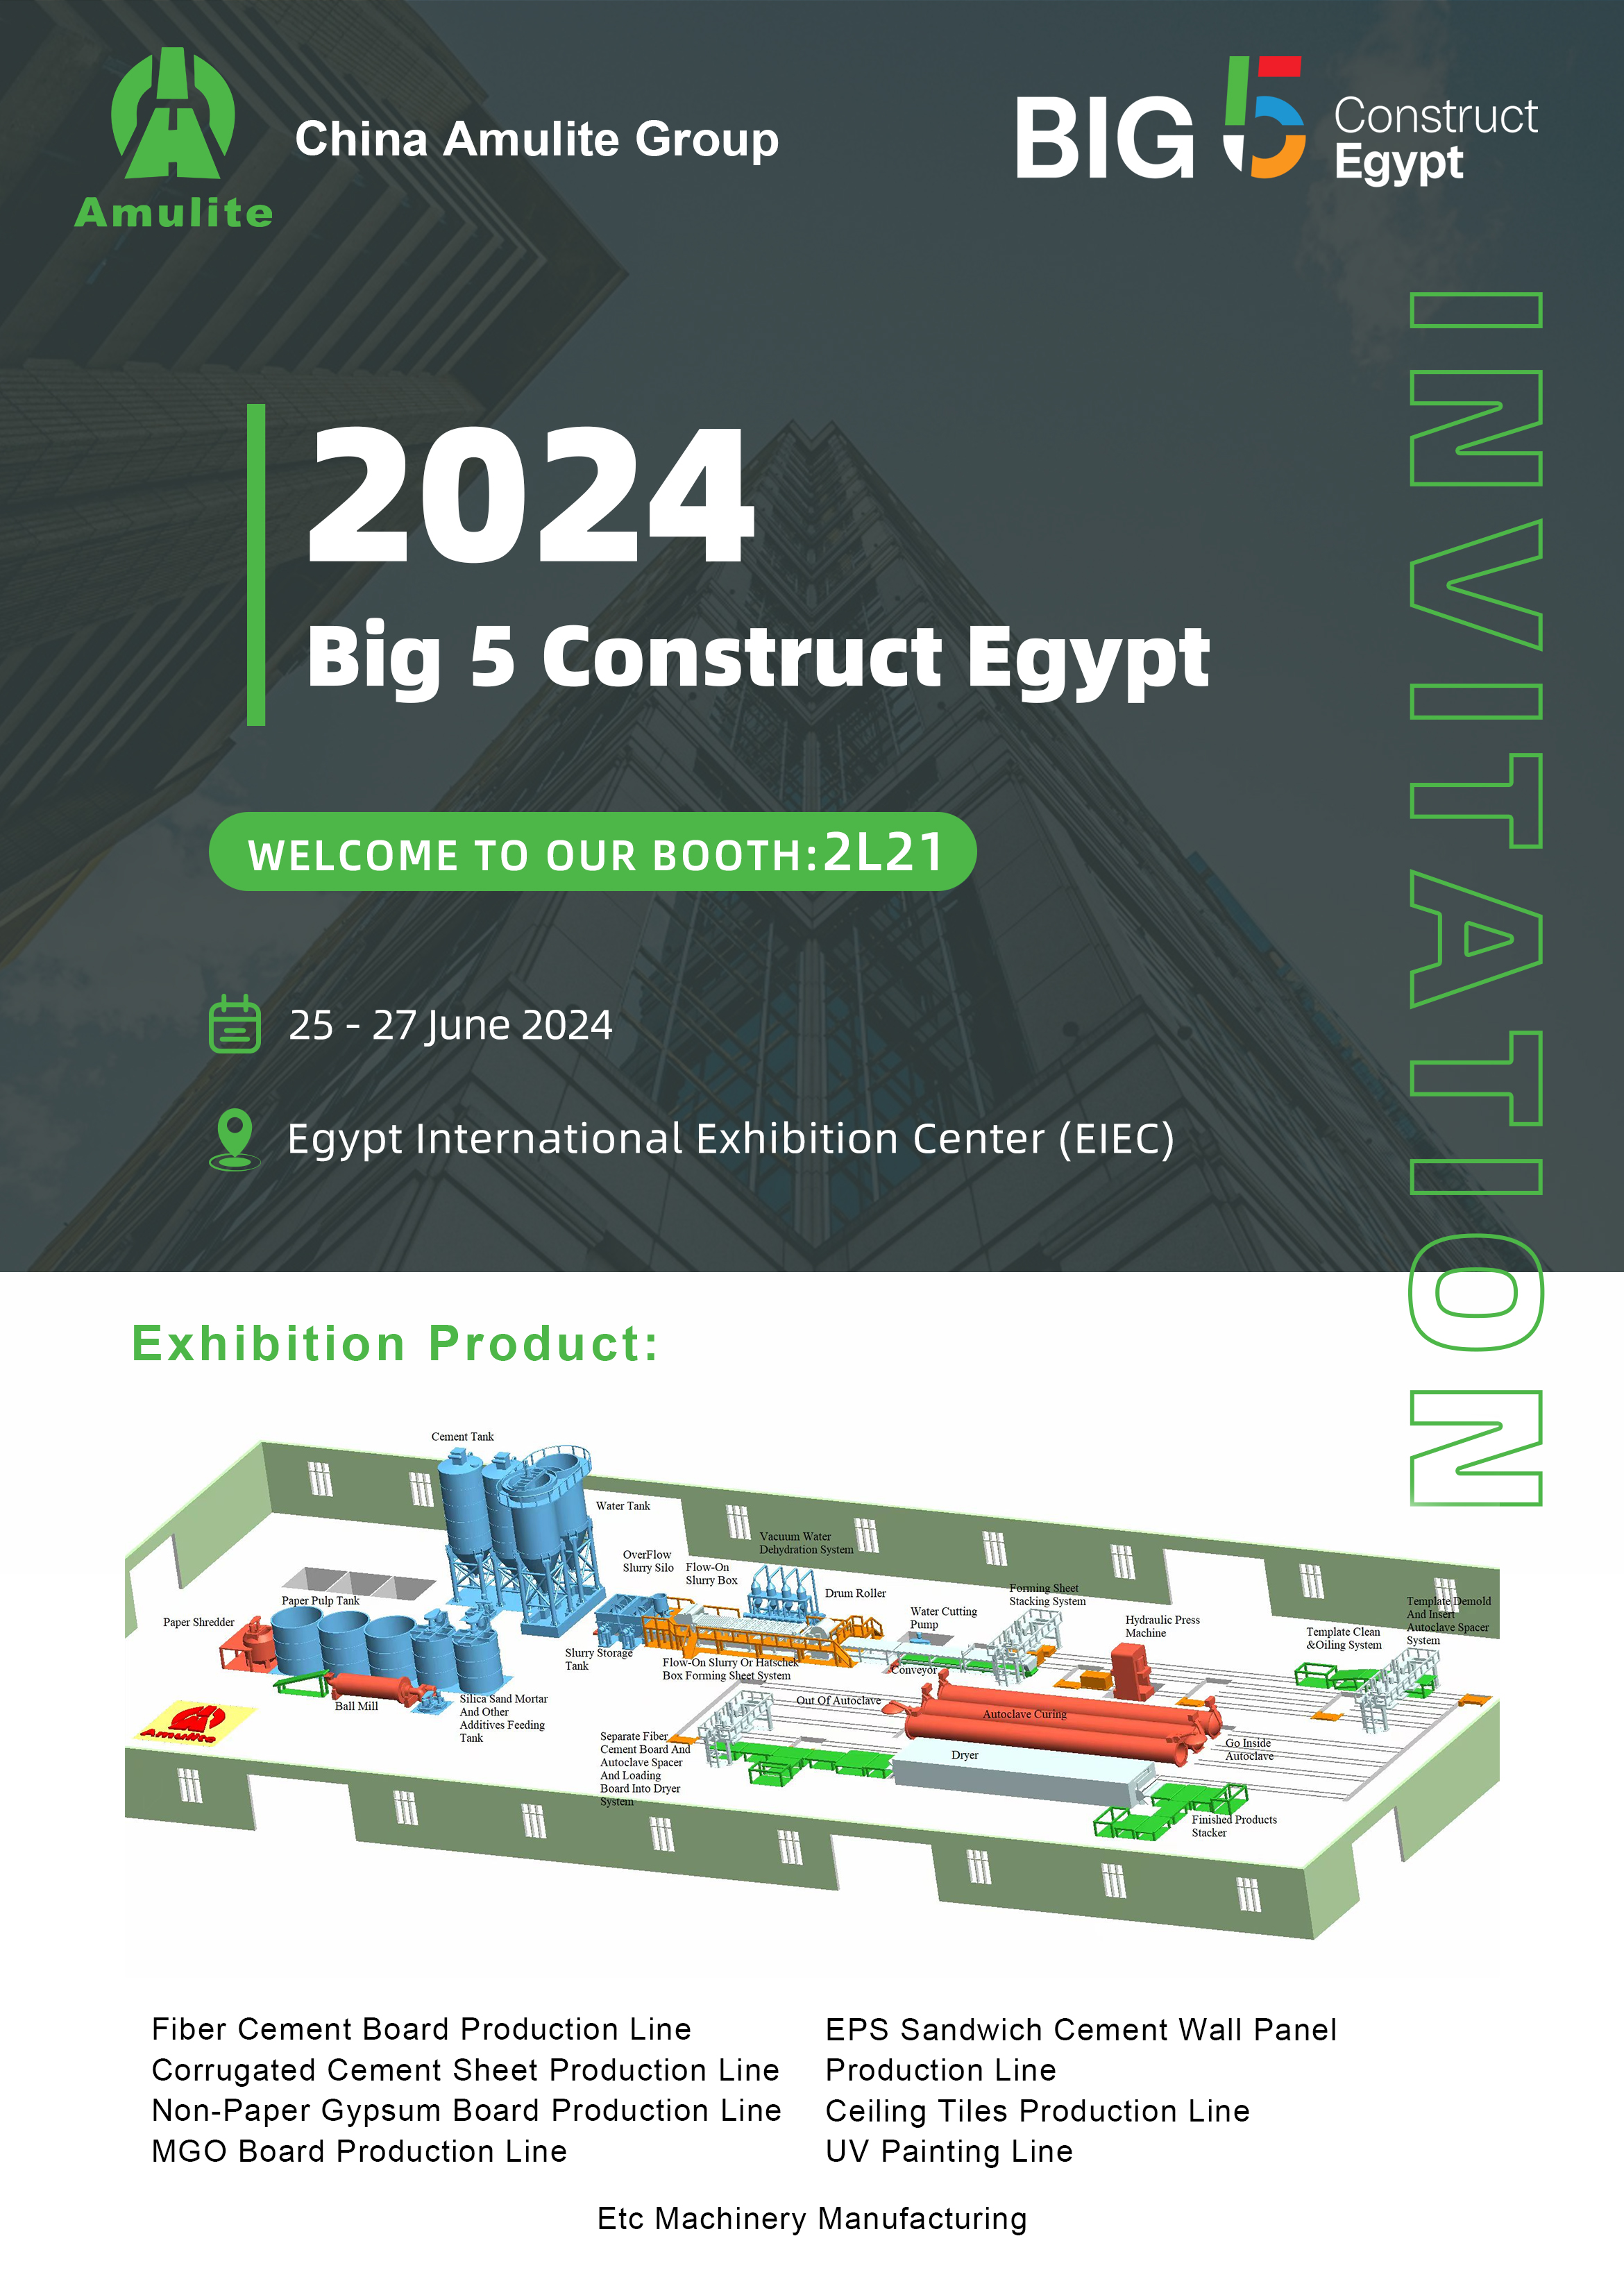 Invitation to Visit Our Booth in Egypt！